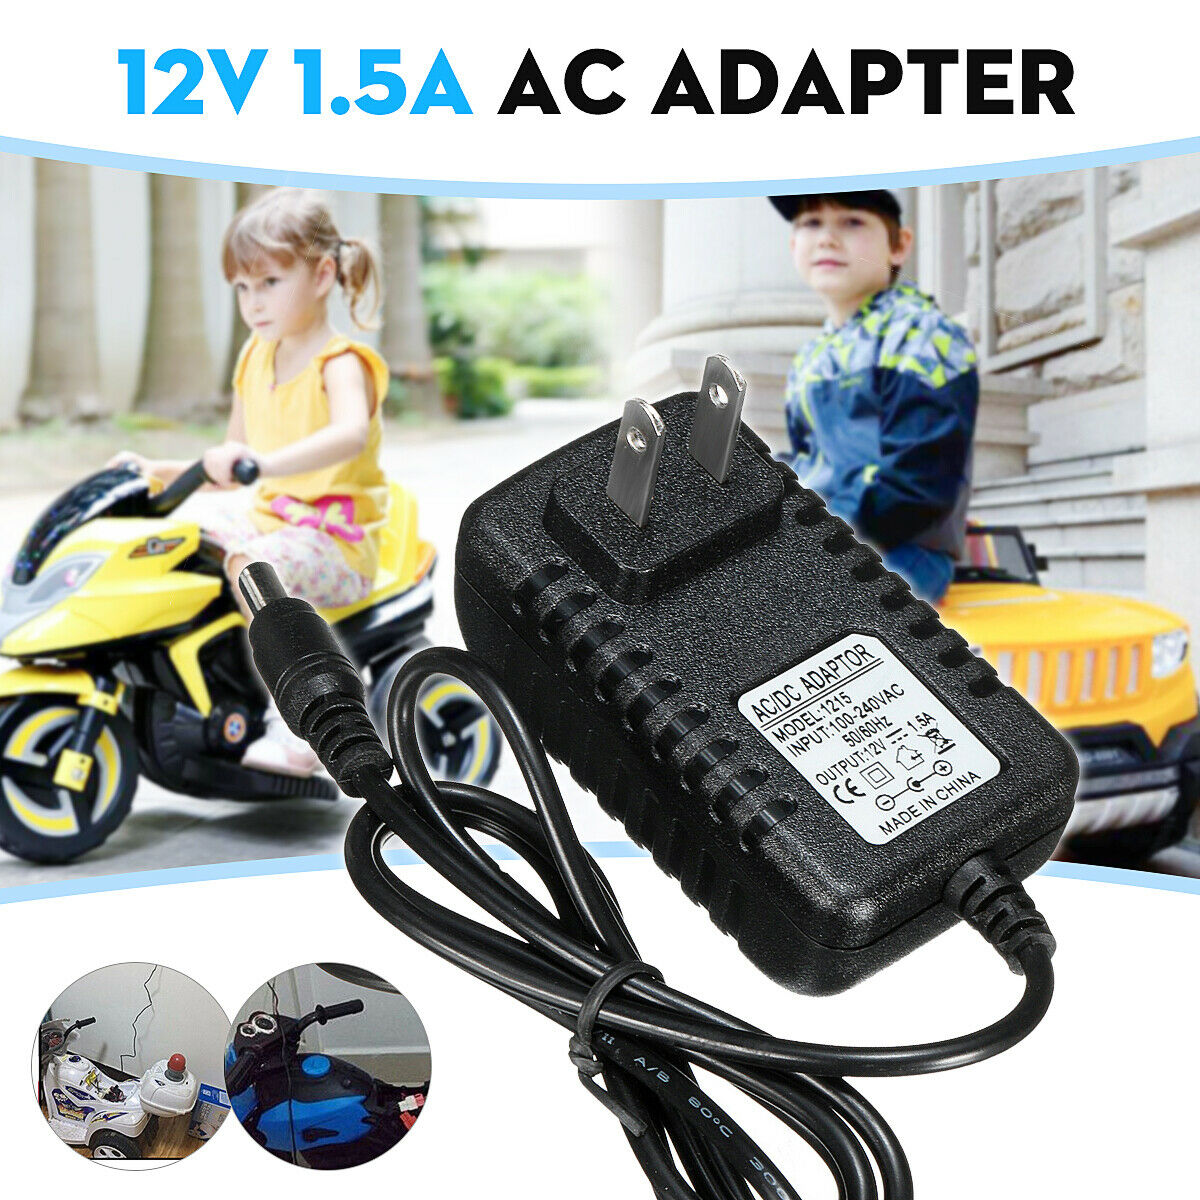 12V 1A Battery Charger Adapter For Kids ATV Quad Ride On Cars Motorcycle Brand: